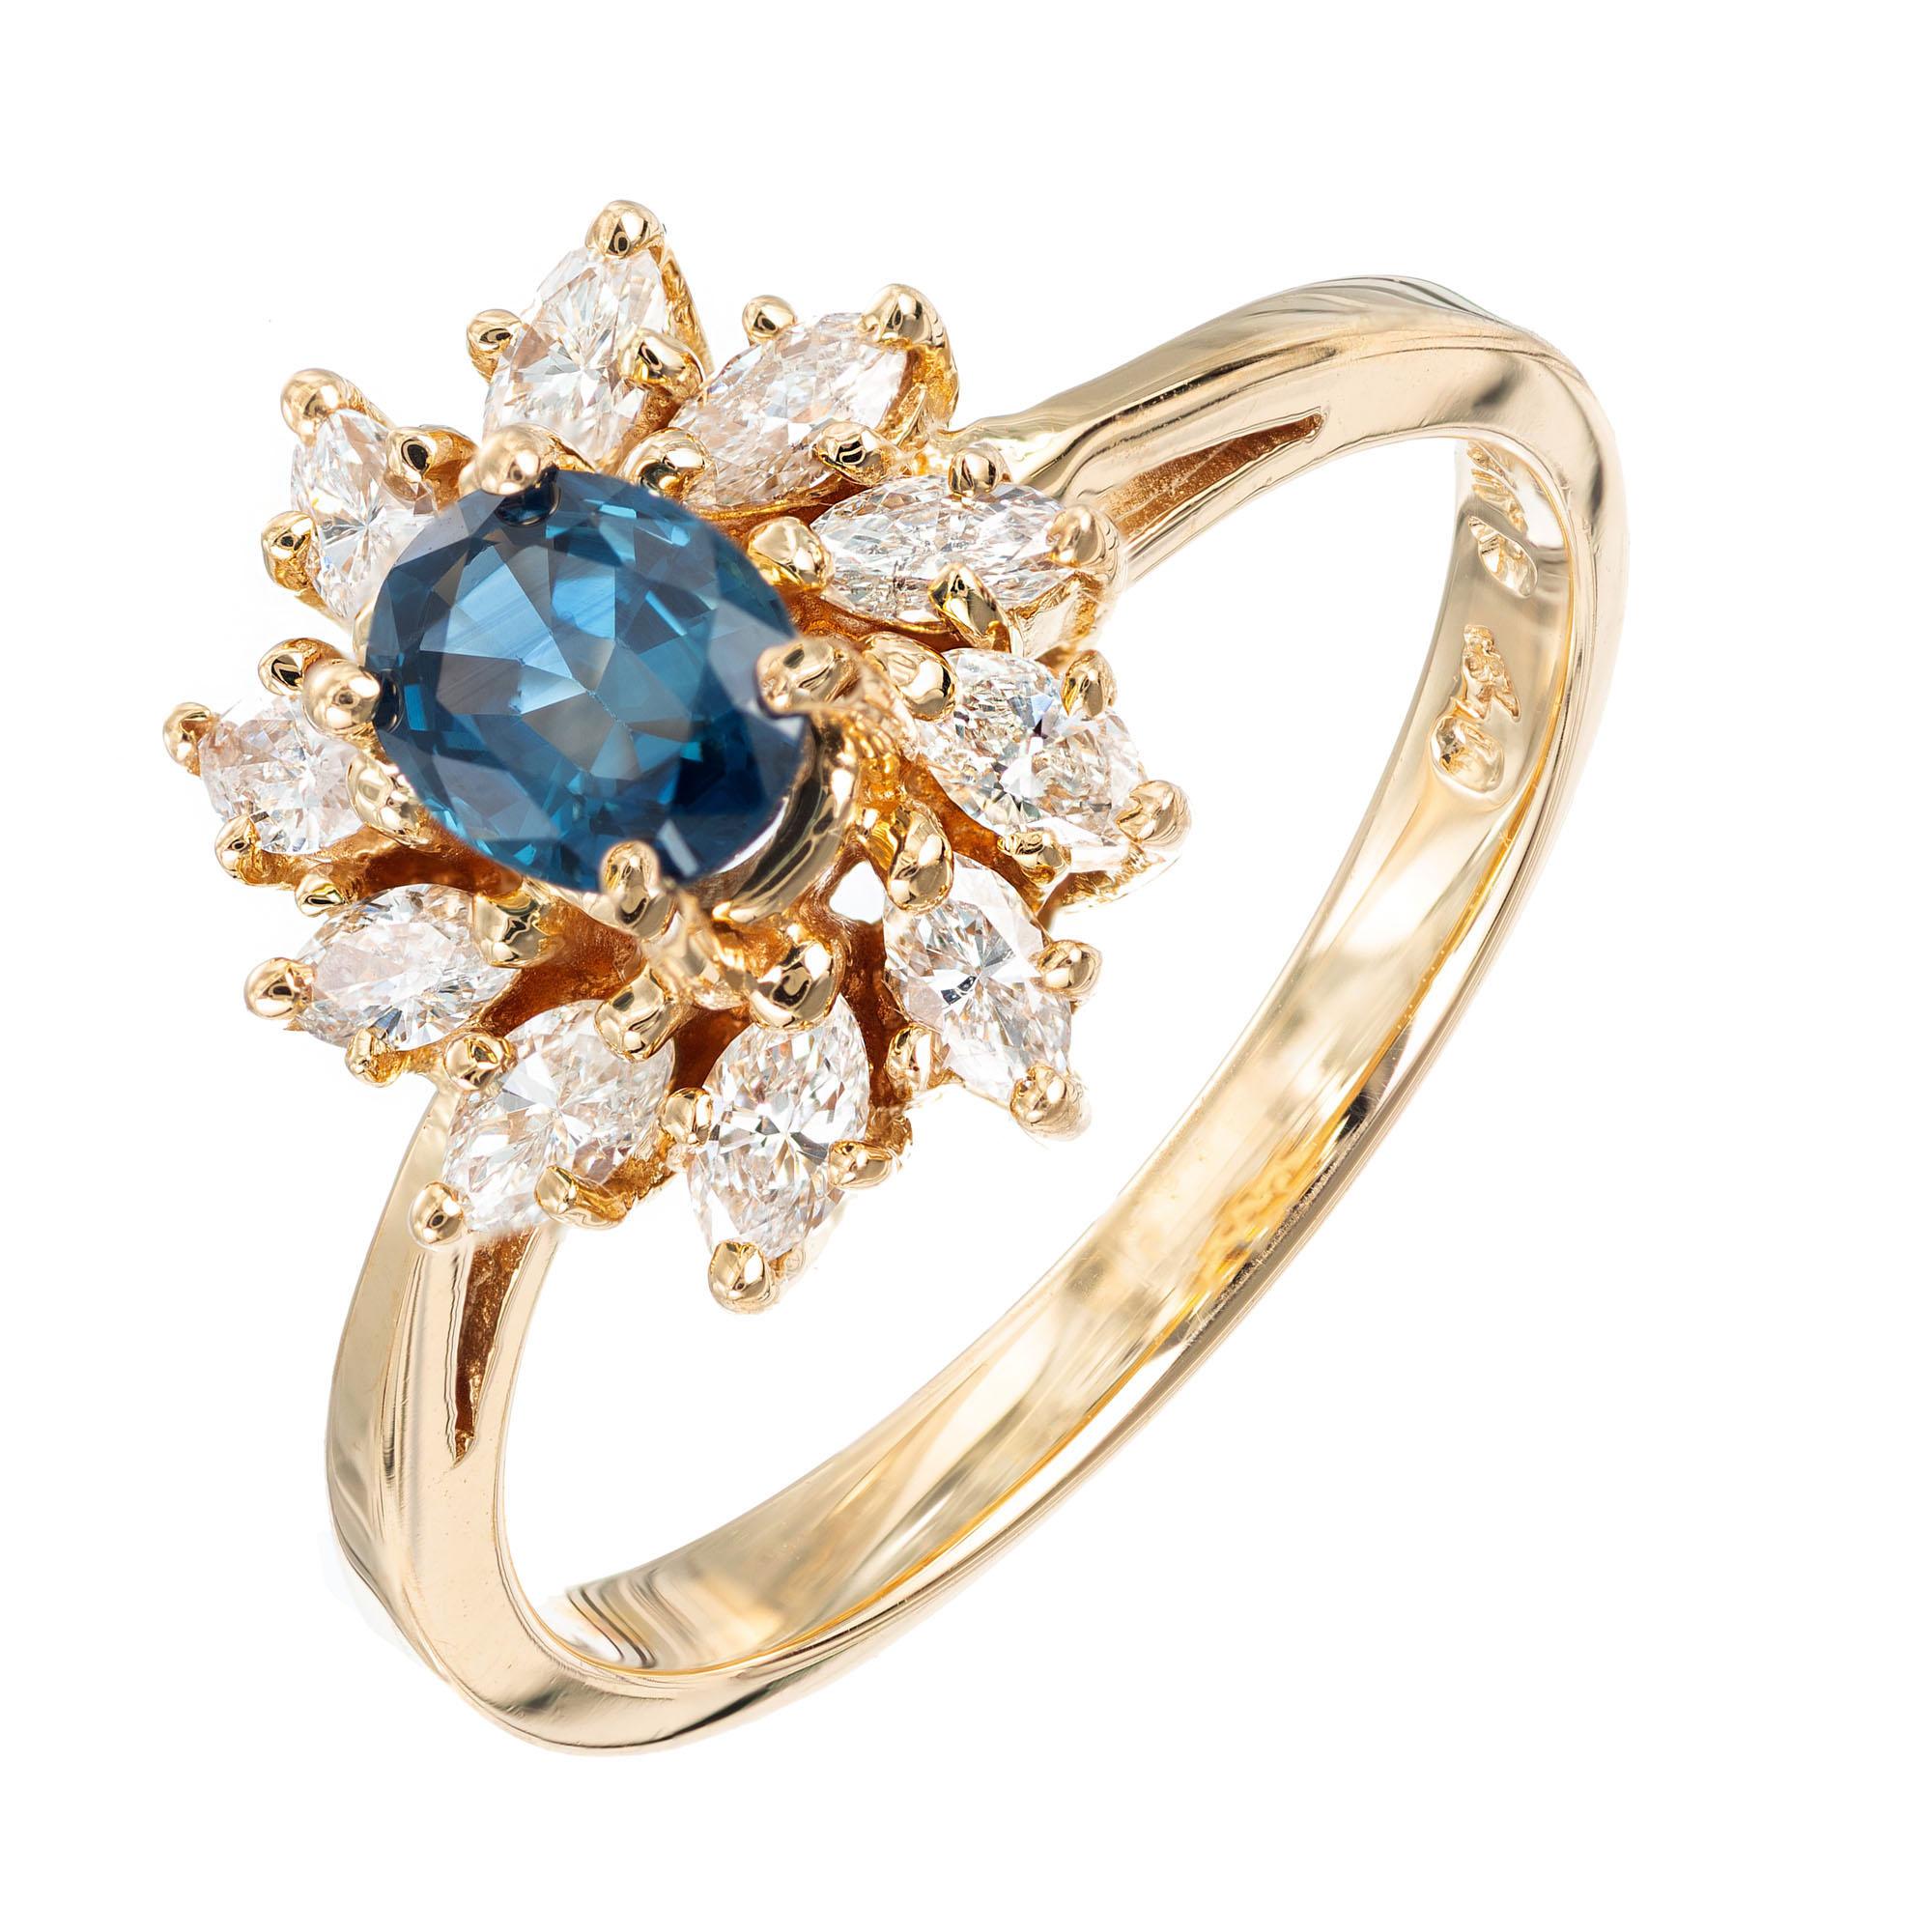 Sapphire and diamond engagement ring. .35cts oval center sapphire with a halo of 10 marquise diamonds in a 14k yellow gold setting. 

1 oval blue sapphire, SI approx. .35cts
10 marquise diamonds, G VS-SI approx. .80cts
Size: 6.25 and sizable 
14k